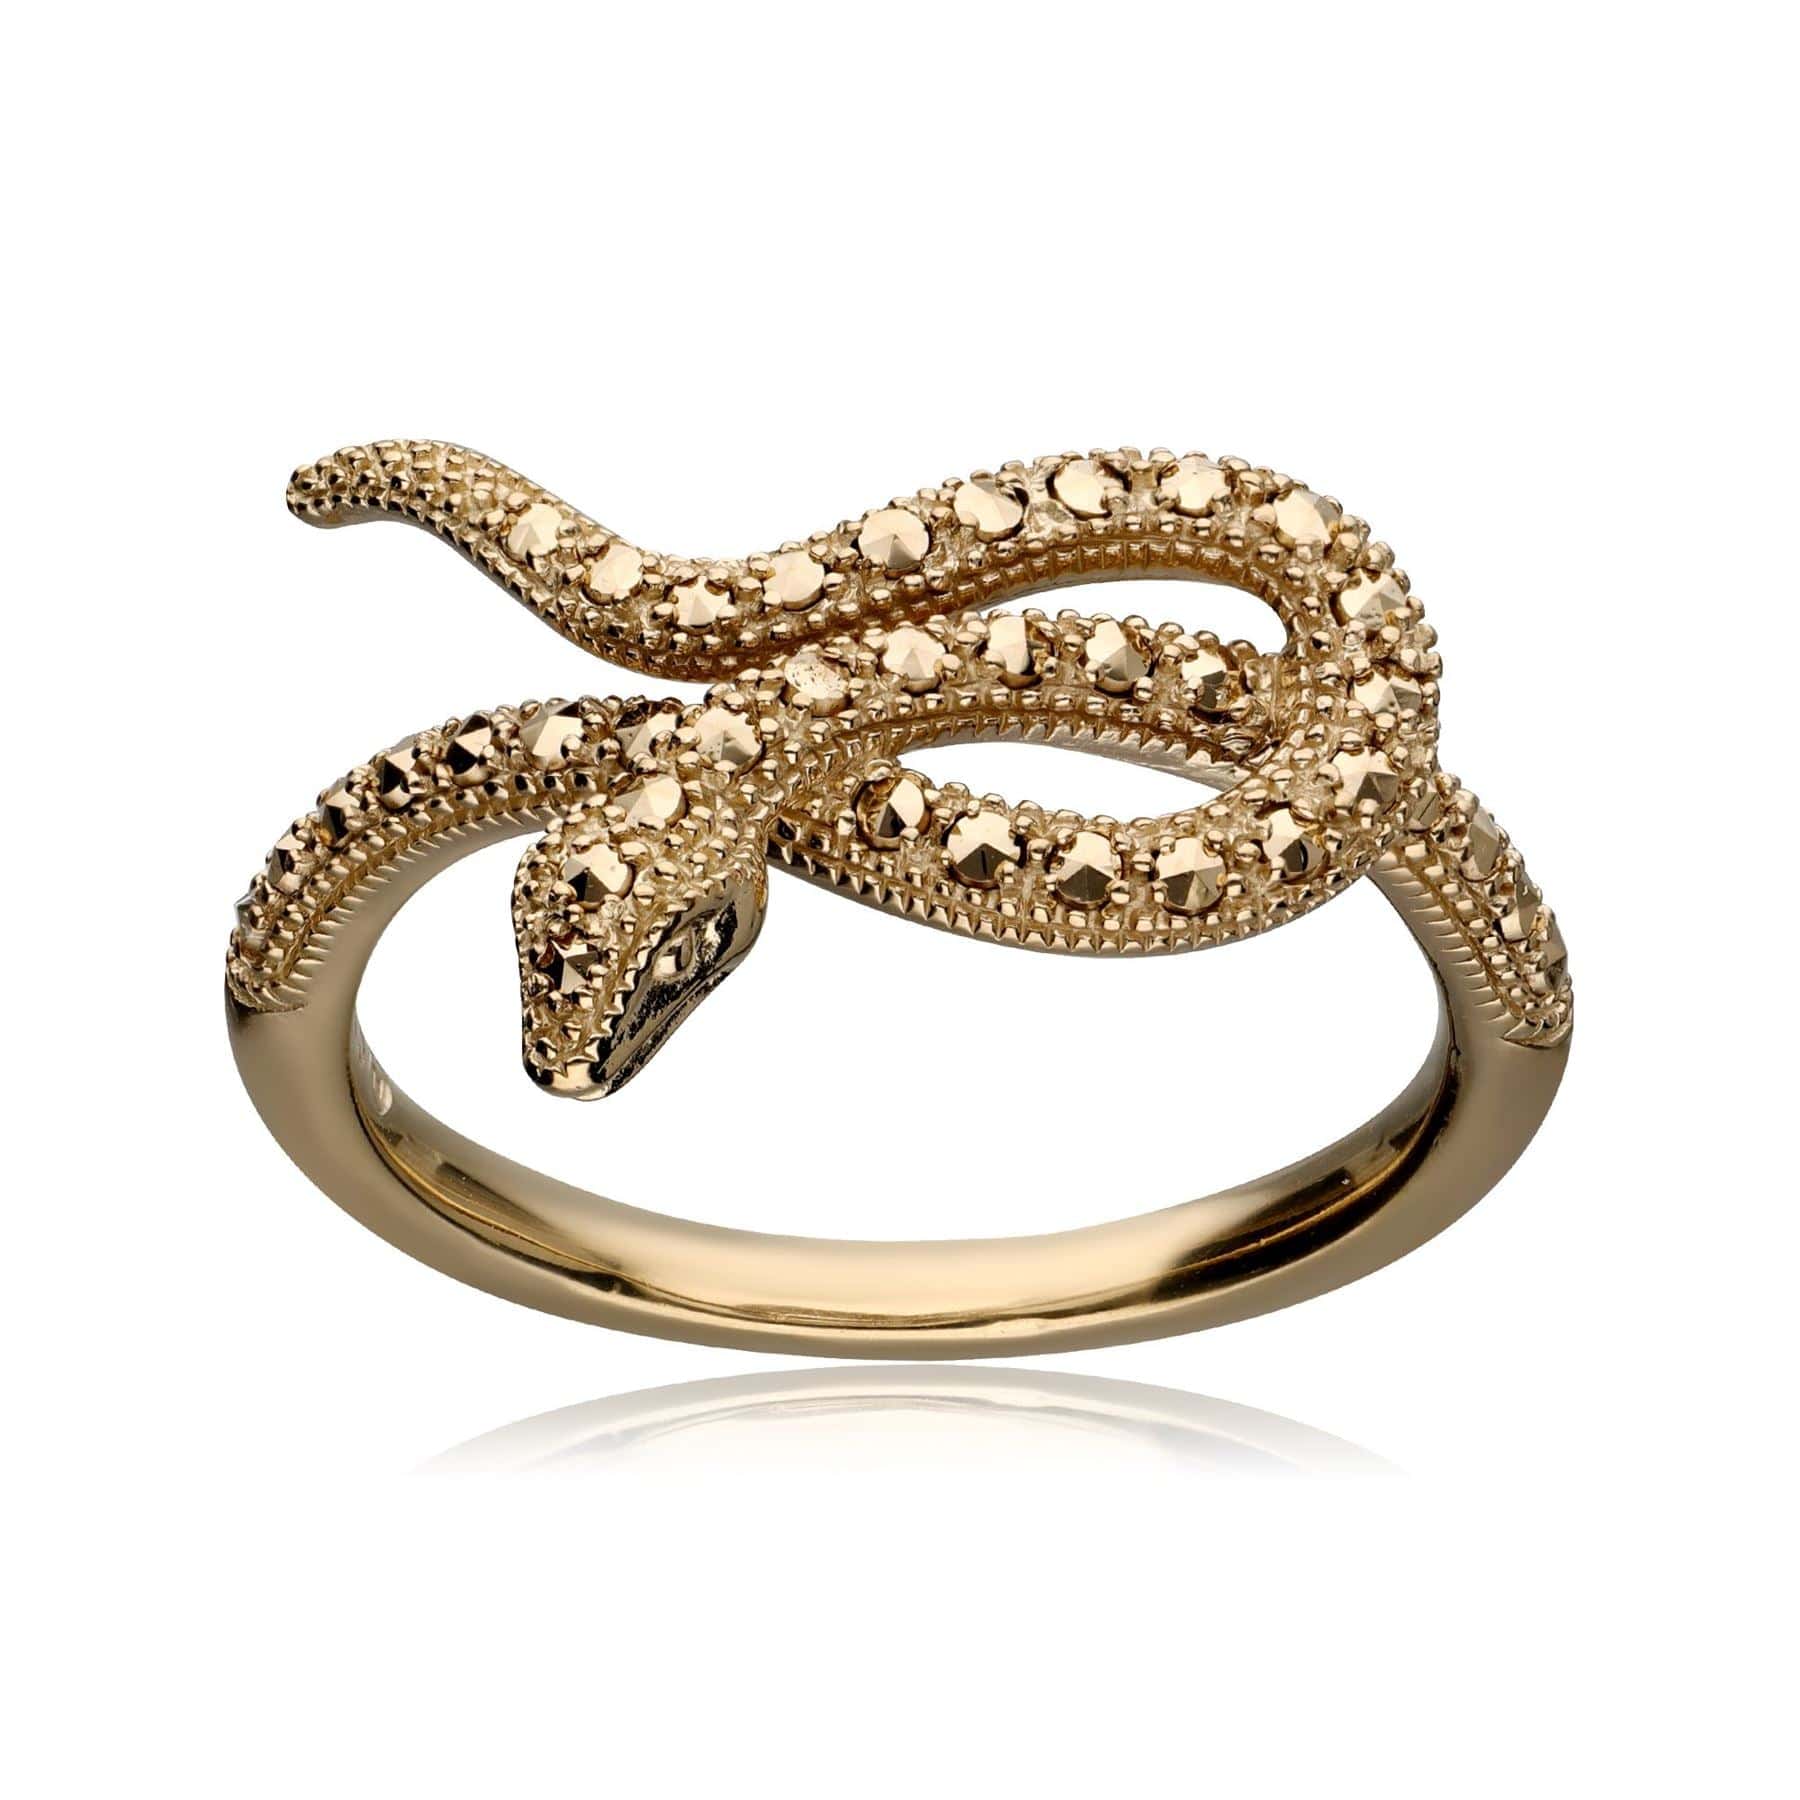 234R043401925 Art Nouveau Marcasite Winding Snake Ring in 18ct Gold Plated Silver 4